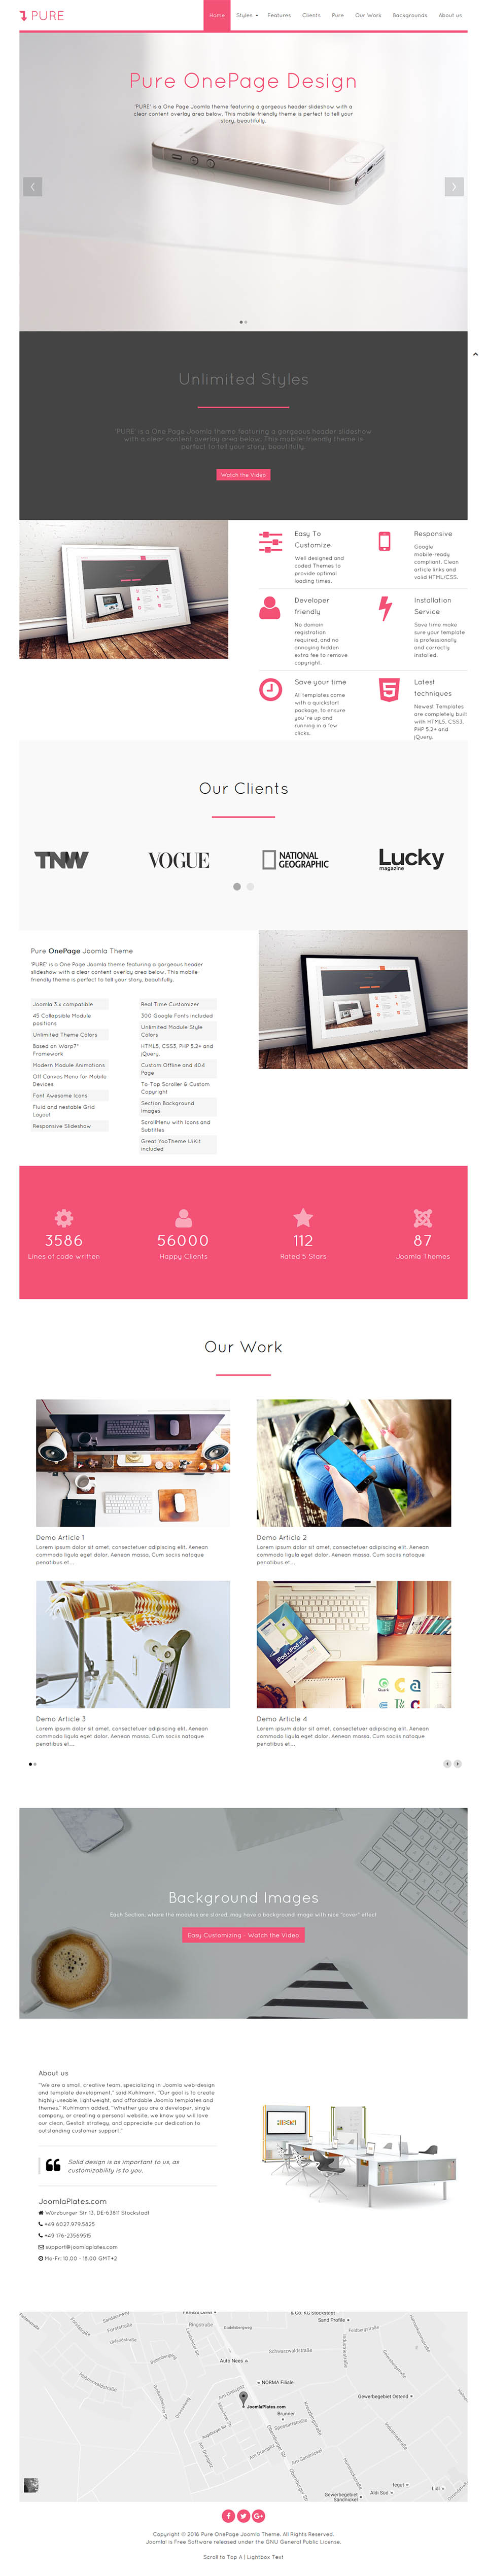 JoomlaPlates Pure v1.0.002 - landing page template hi-tech company for ...